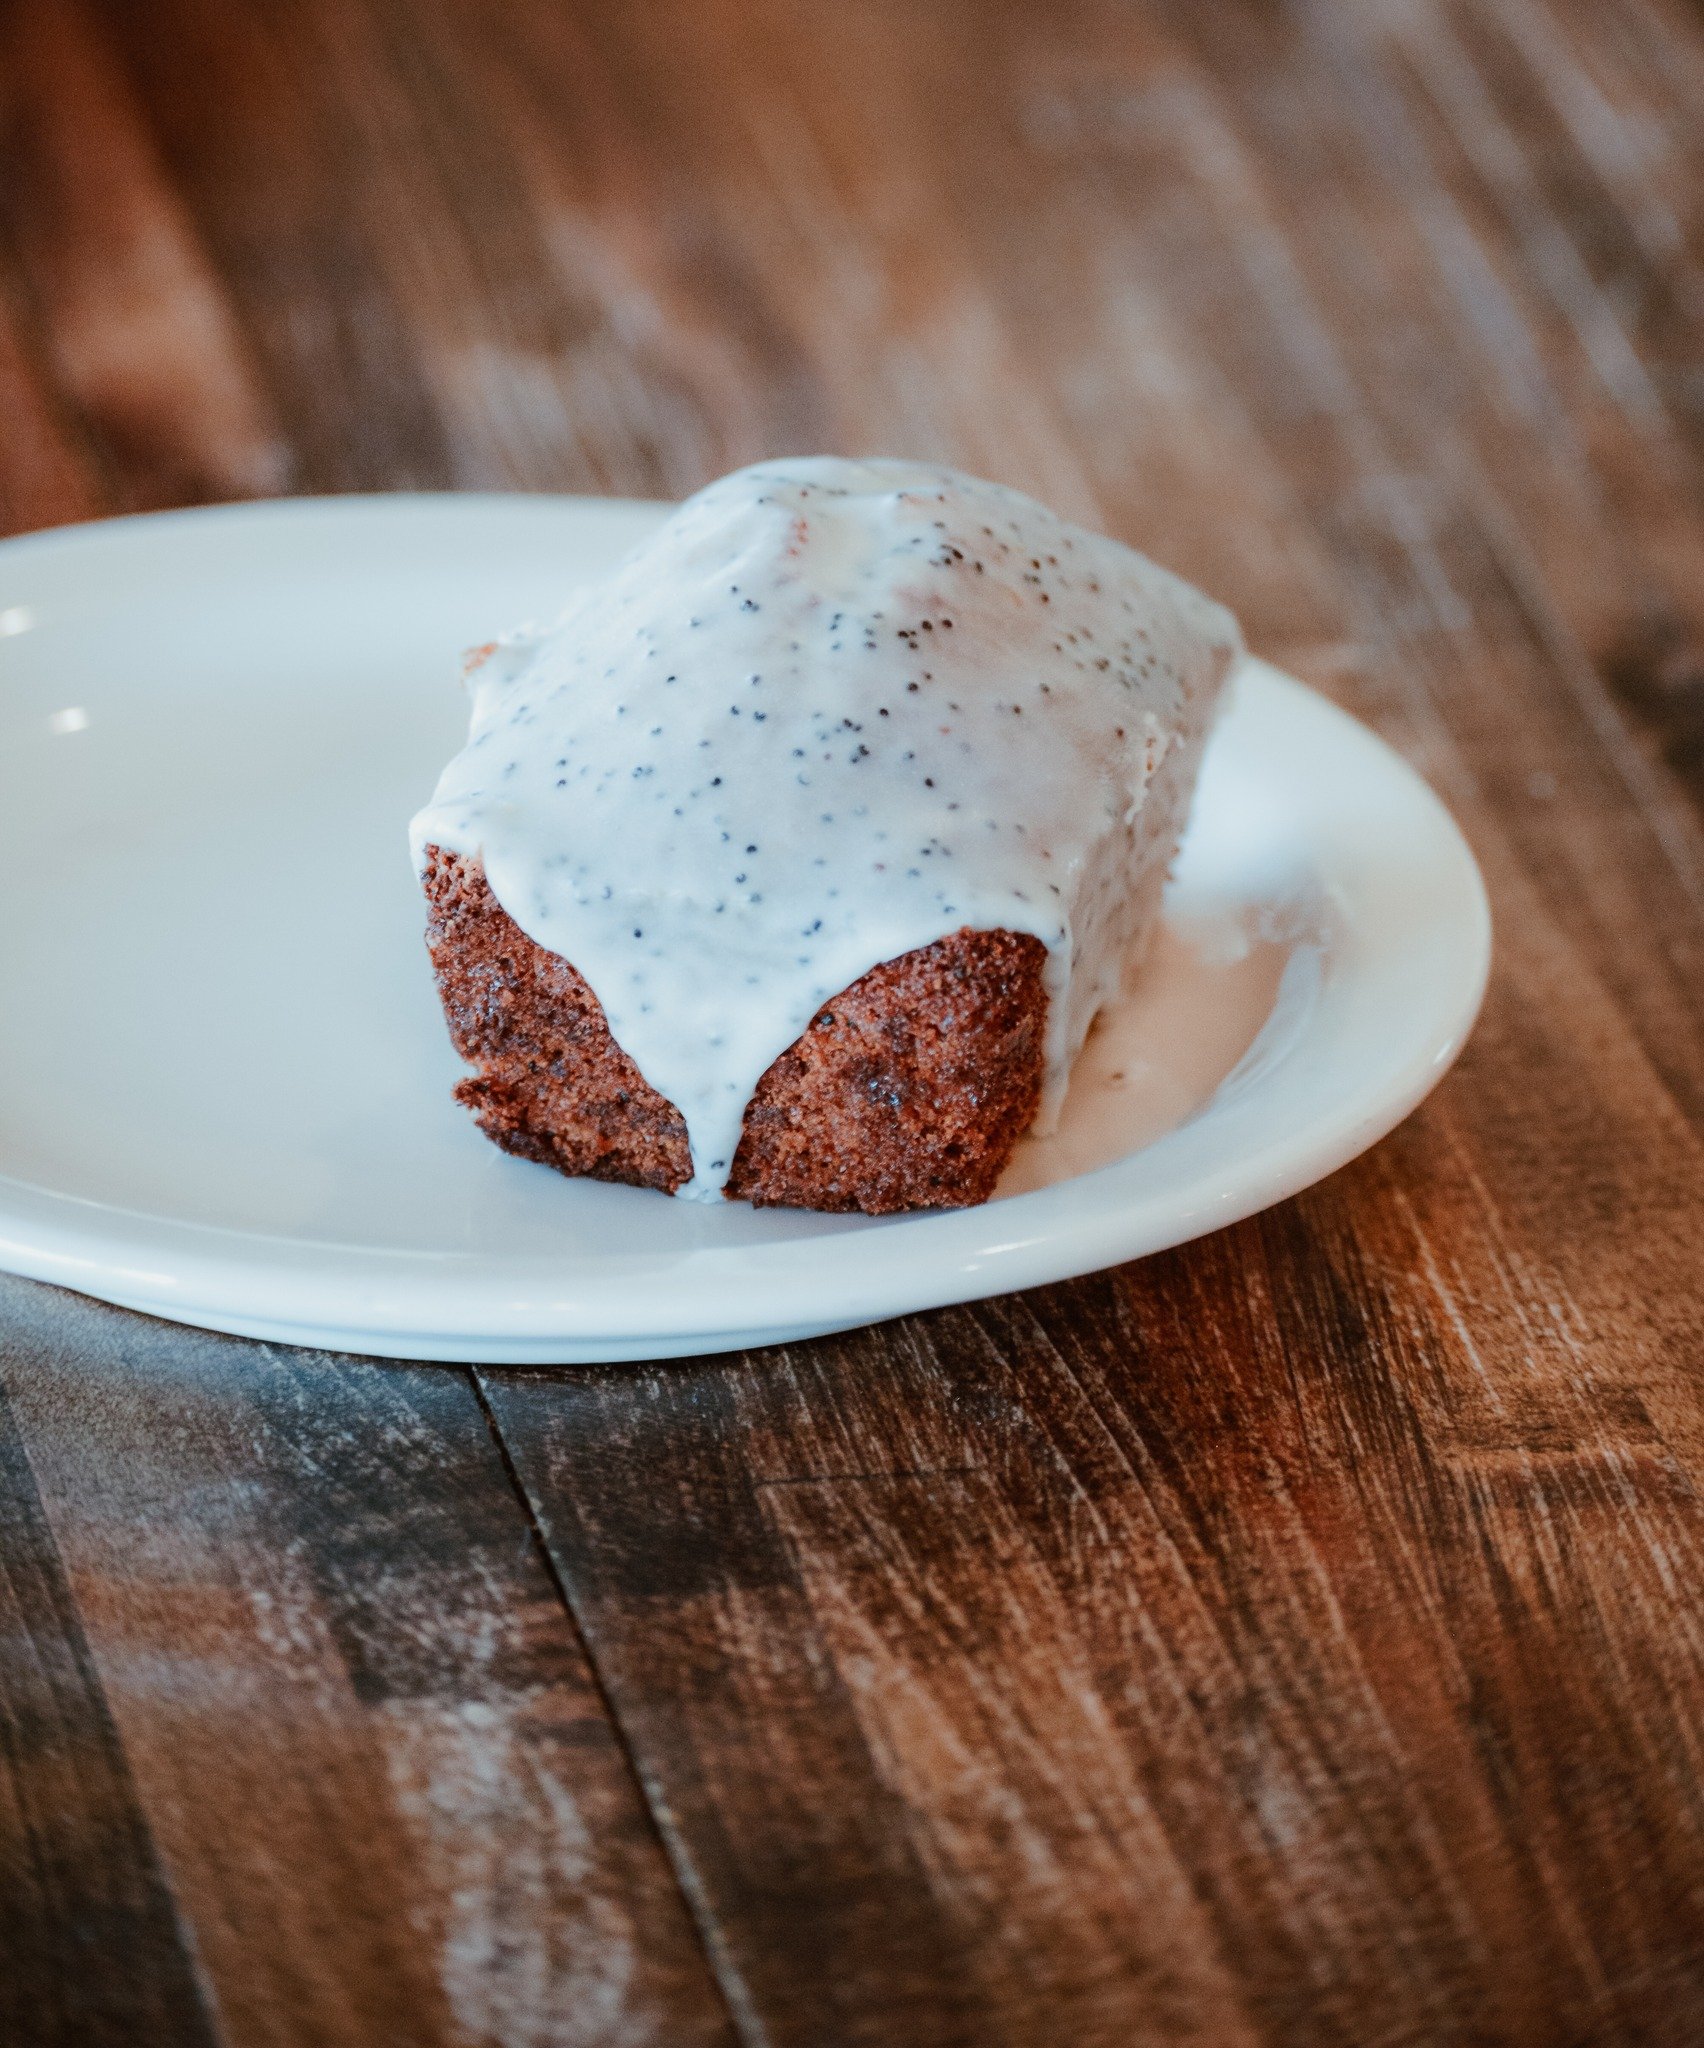 Our gluten-free Lemon Poppy Financier has everyone talking, and for good reason! A delicate French pastry that combines the rich, nutty flavors of almond flour with the bright citrus notes of lemon and the subtle crunch of poppy seeds, no wonder it's